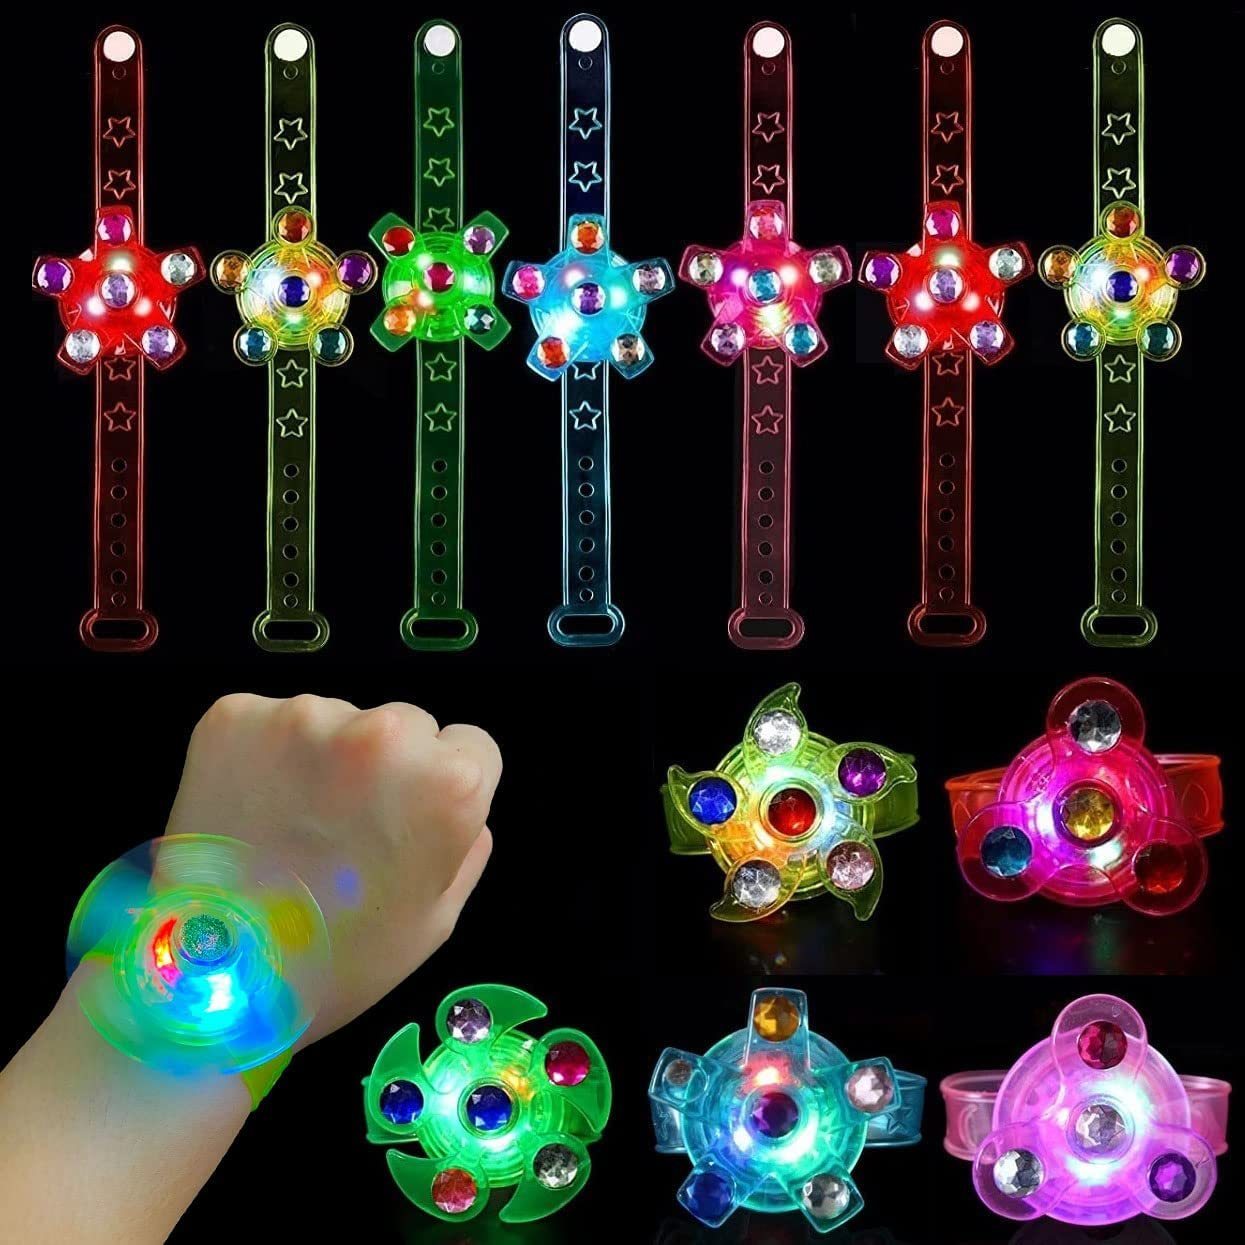 LED Light Sticks 25 Pack LED UP Fidget Spinner Party Party Favors for Kids Glow in the Dark Party Supplies Higdrase Treasure Box 230606